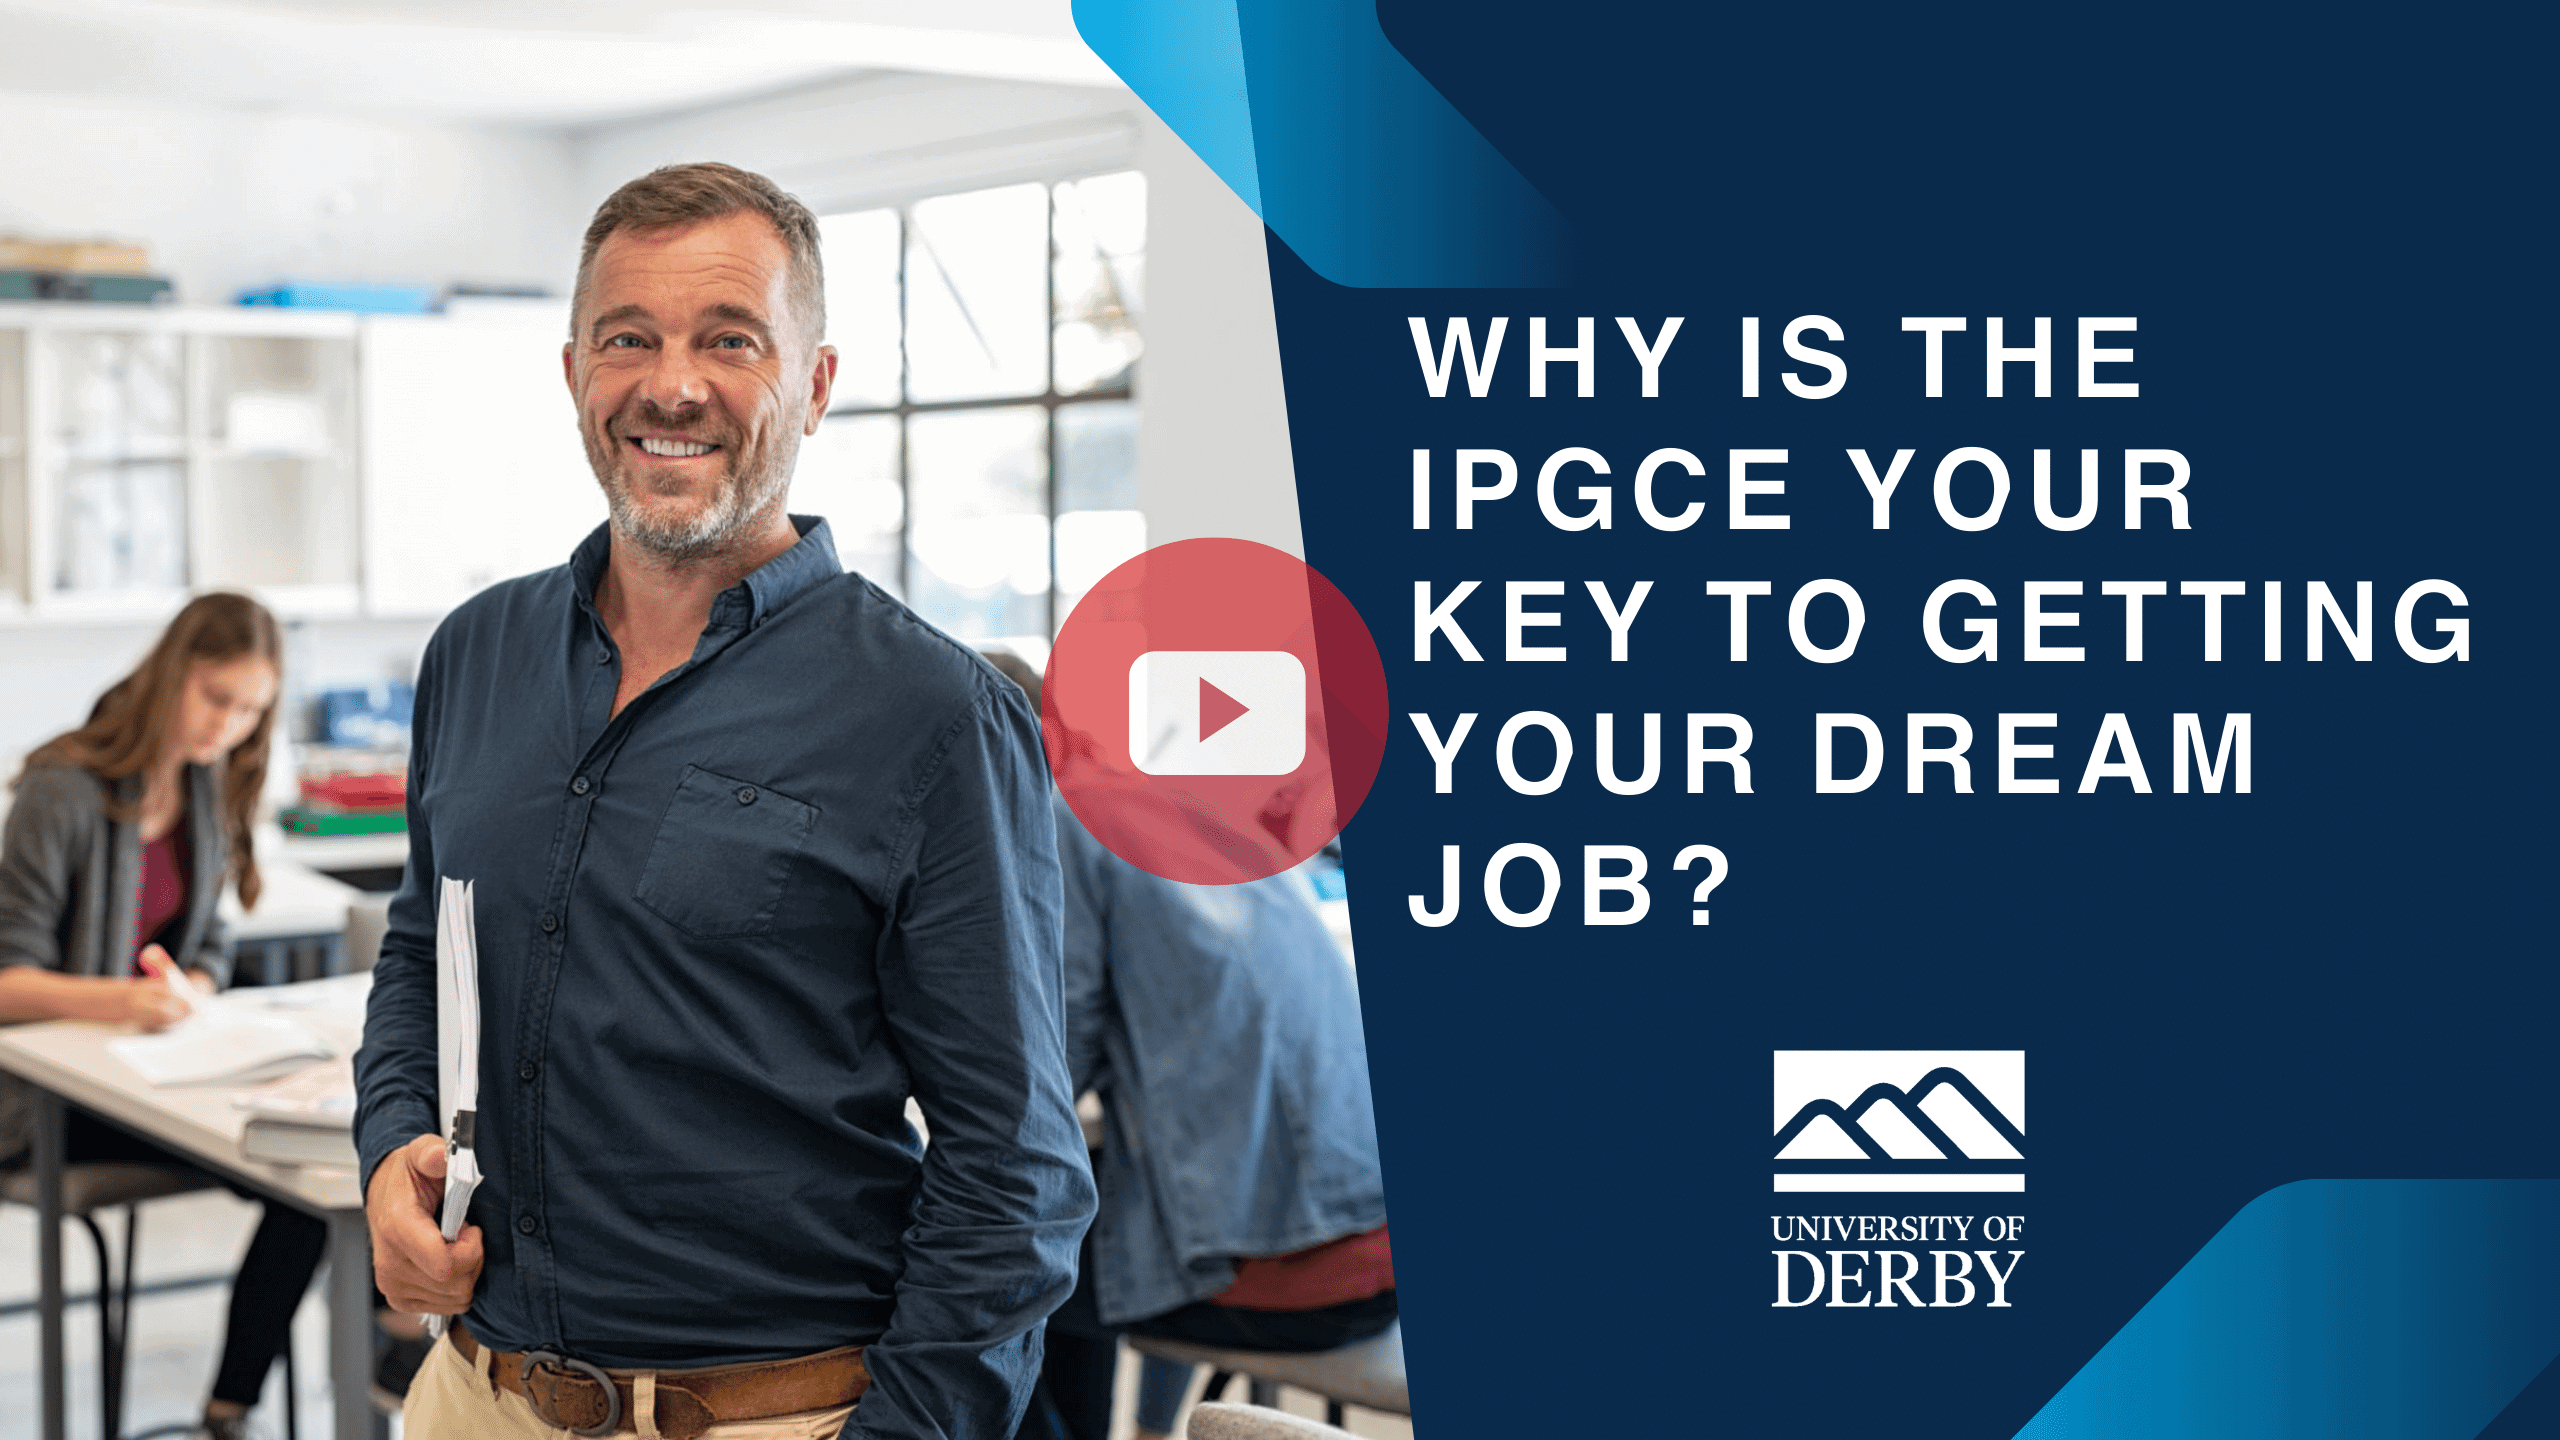 Join the UK's #1 IPGCE at Derby